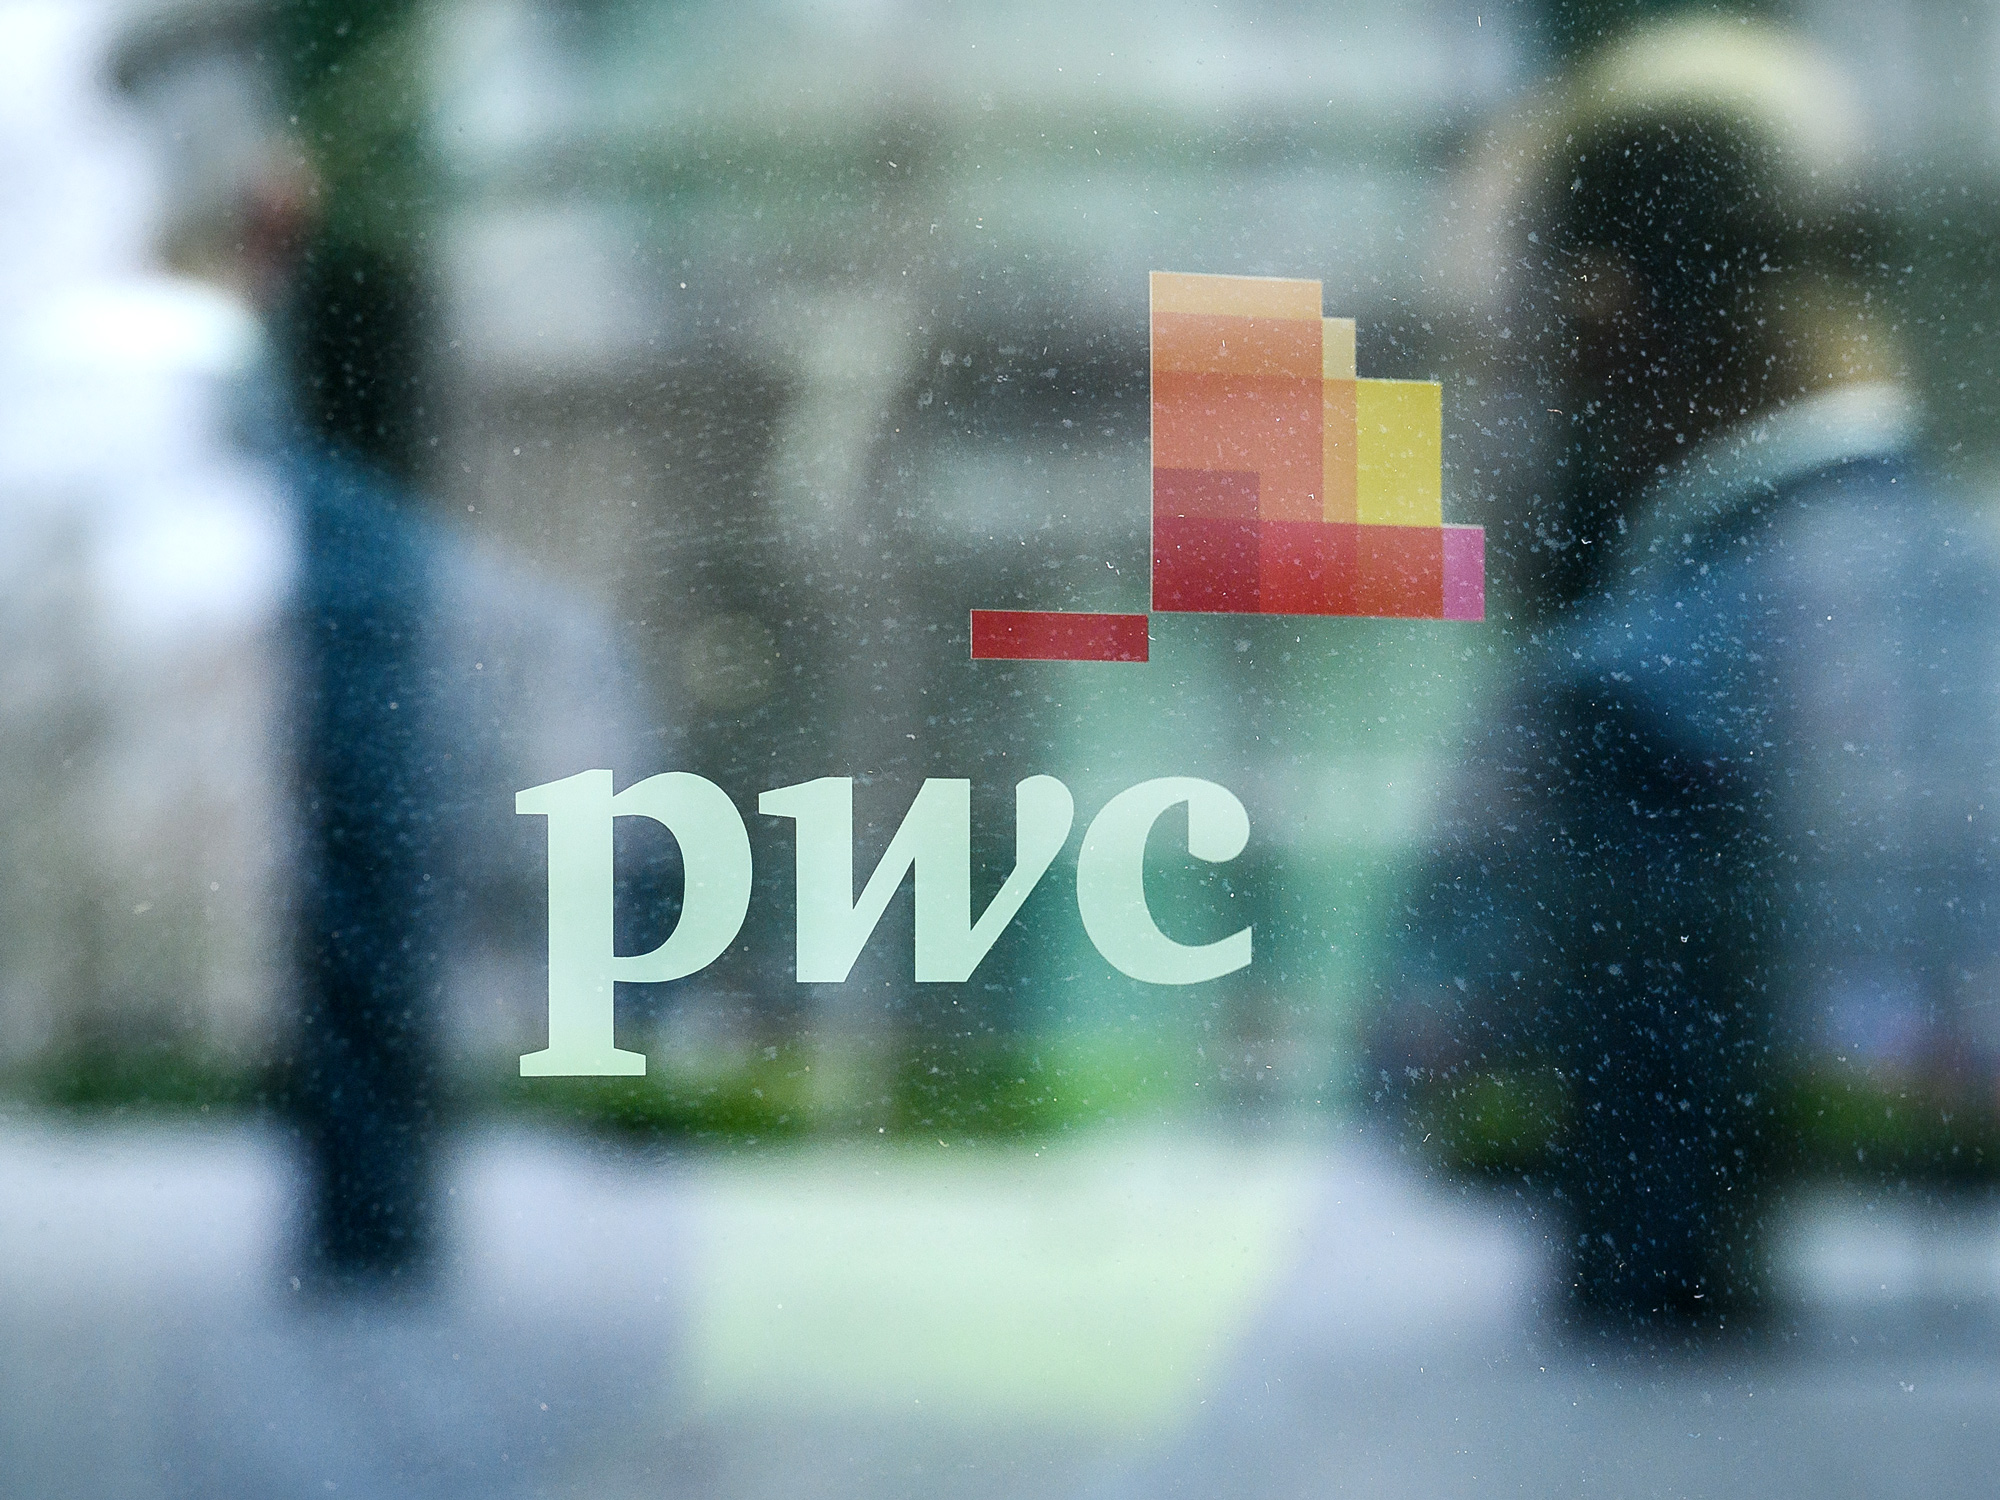 PwC Australia is Very Very Sorry, You Guys - Going Concern